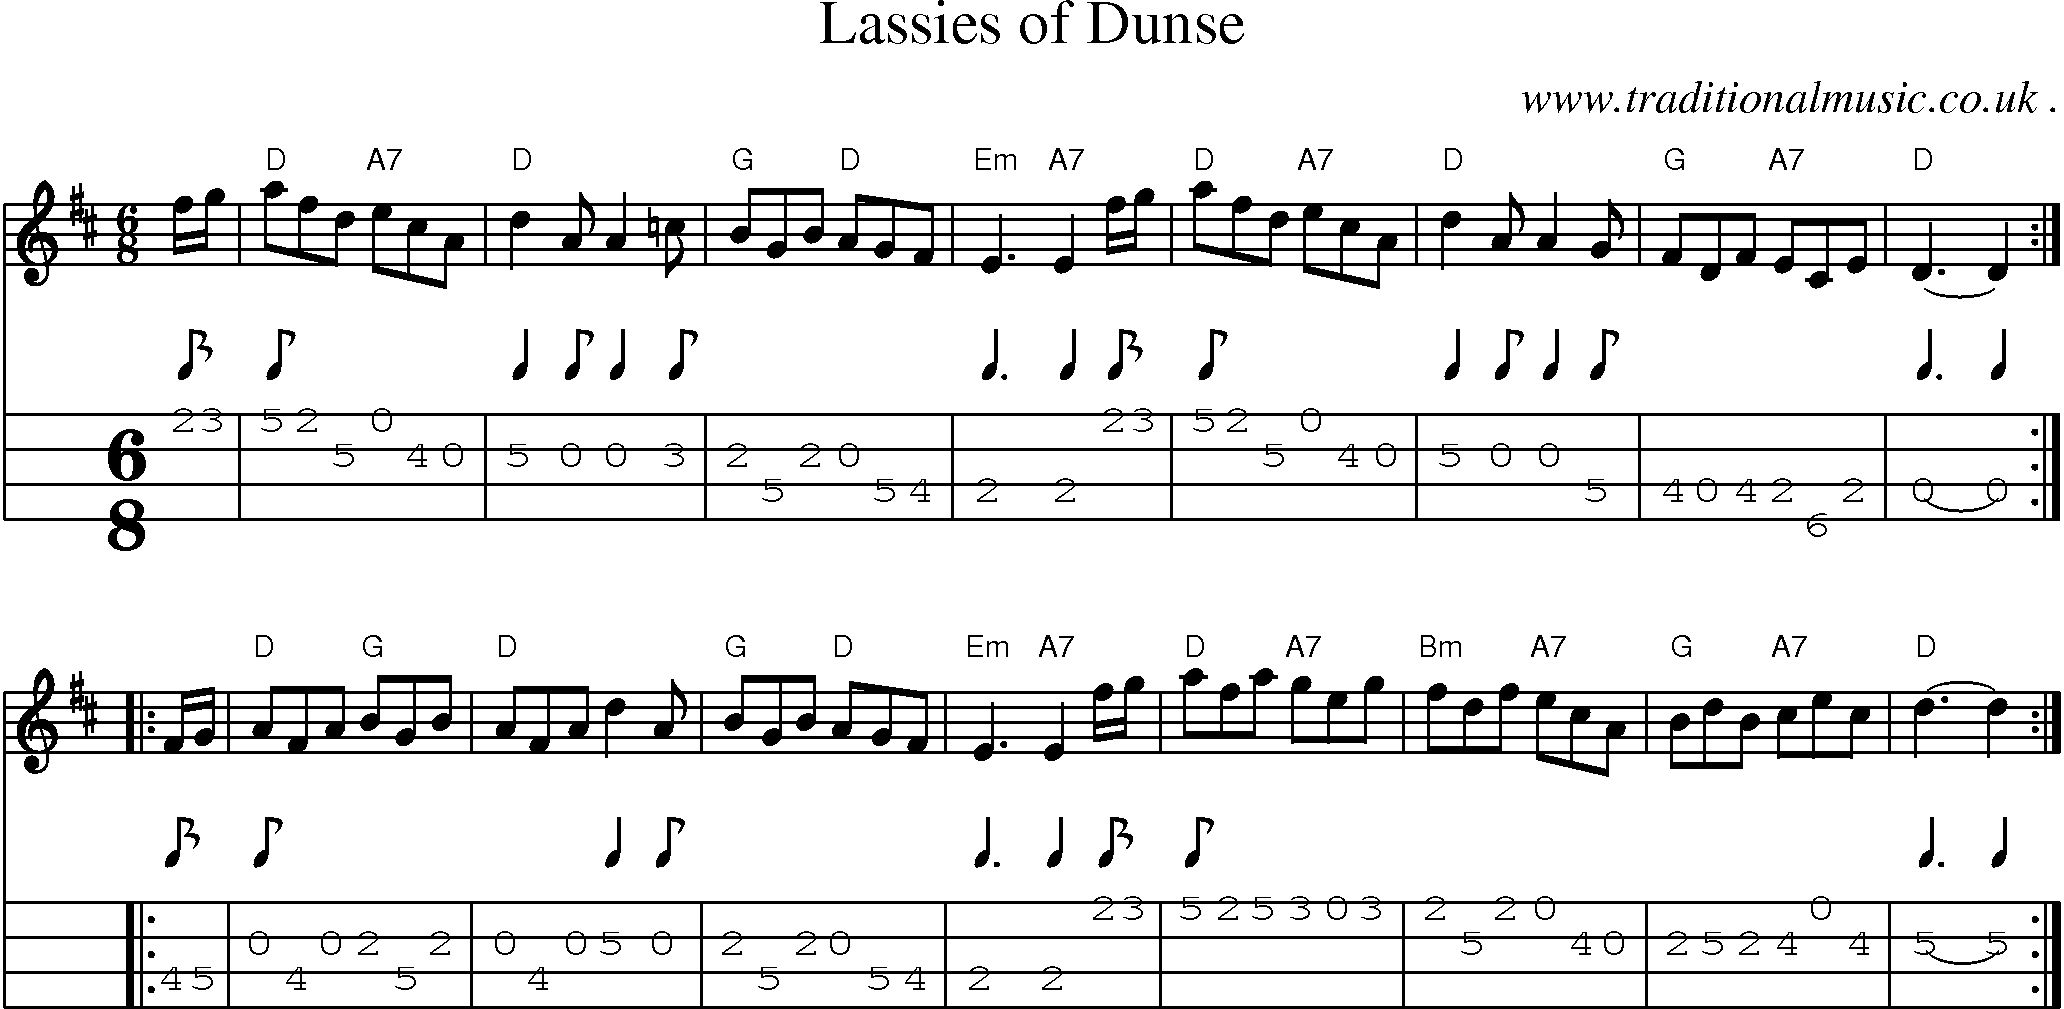 Sheet-music  score, Chords and Mandolin Tabs for Lassies Of Dunse